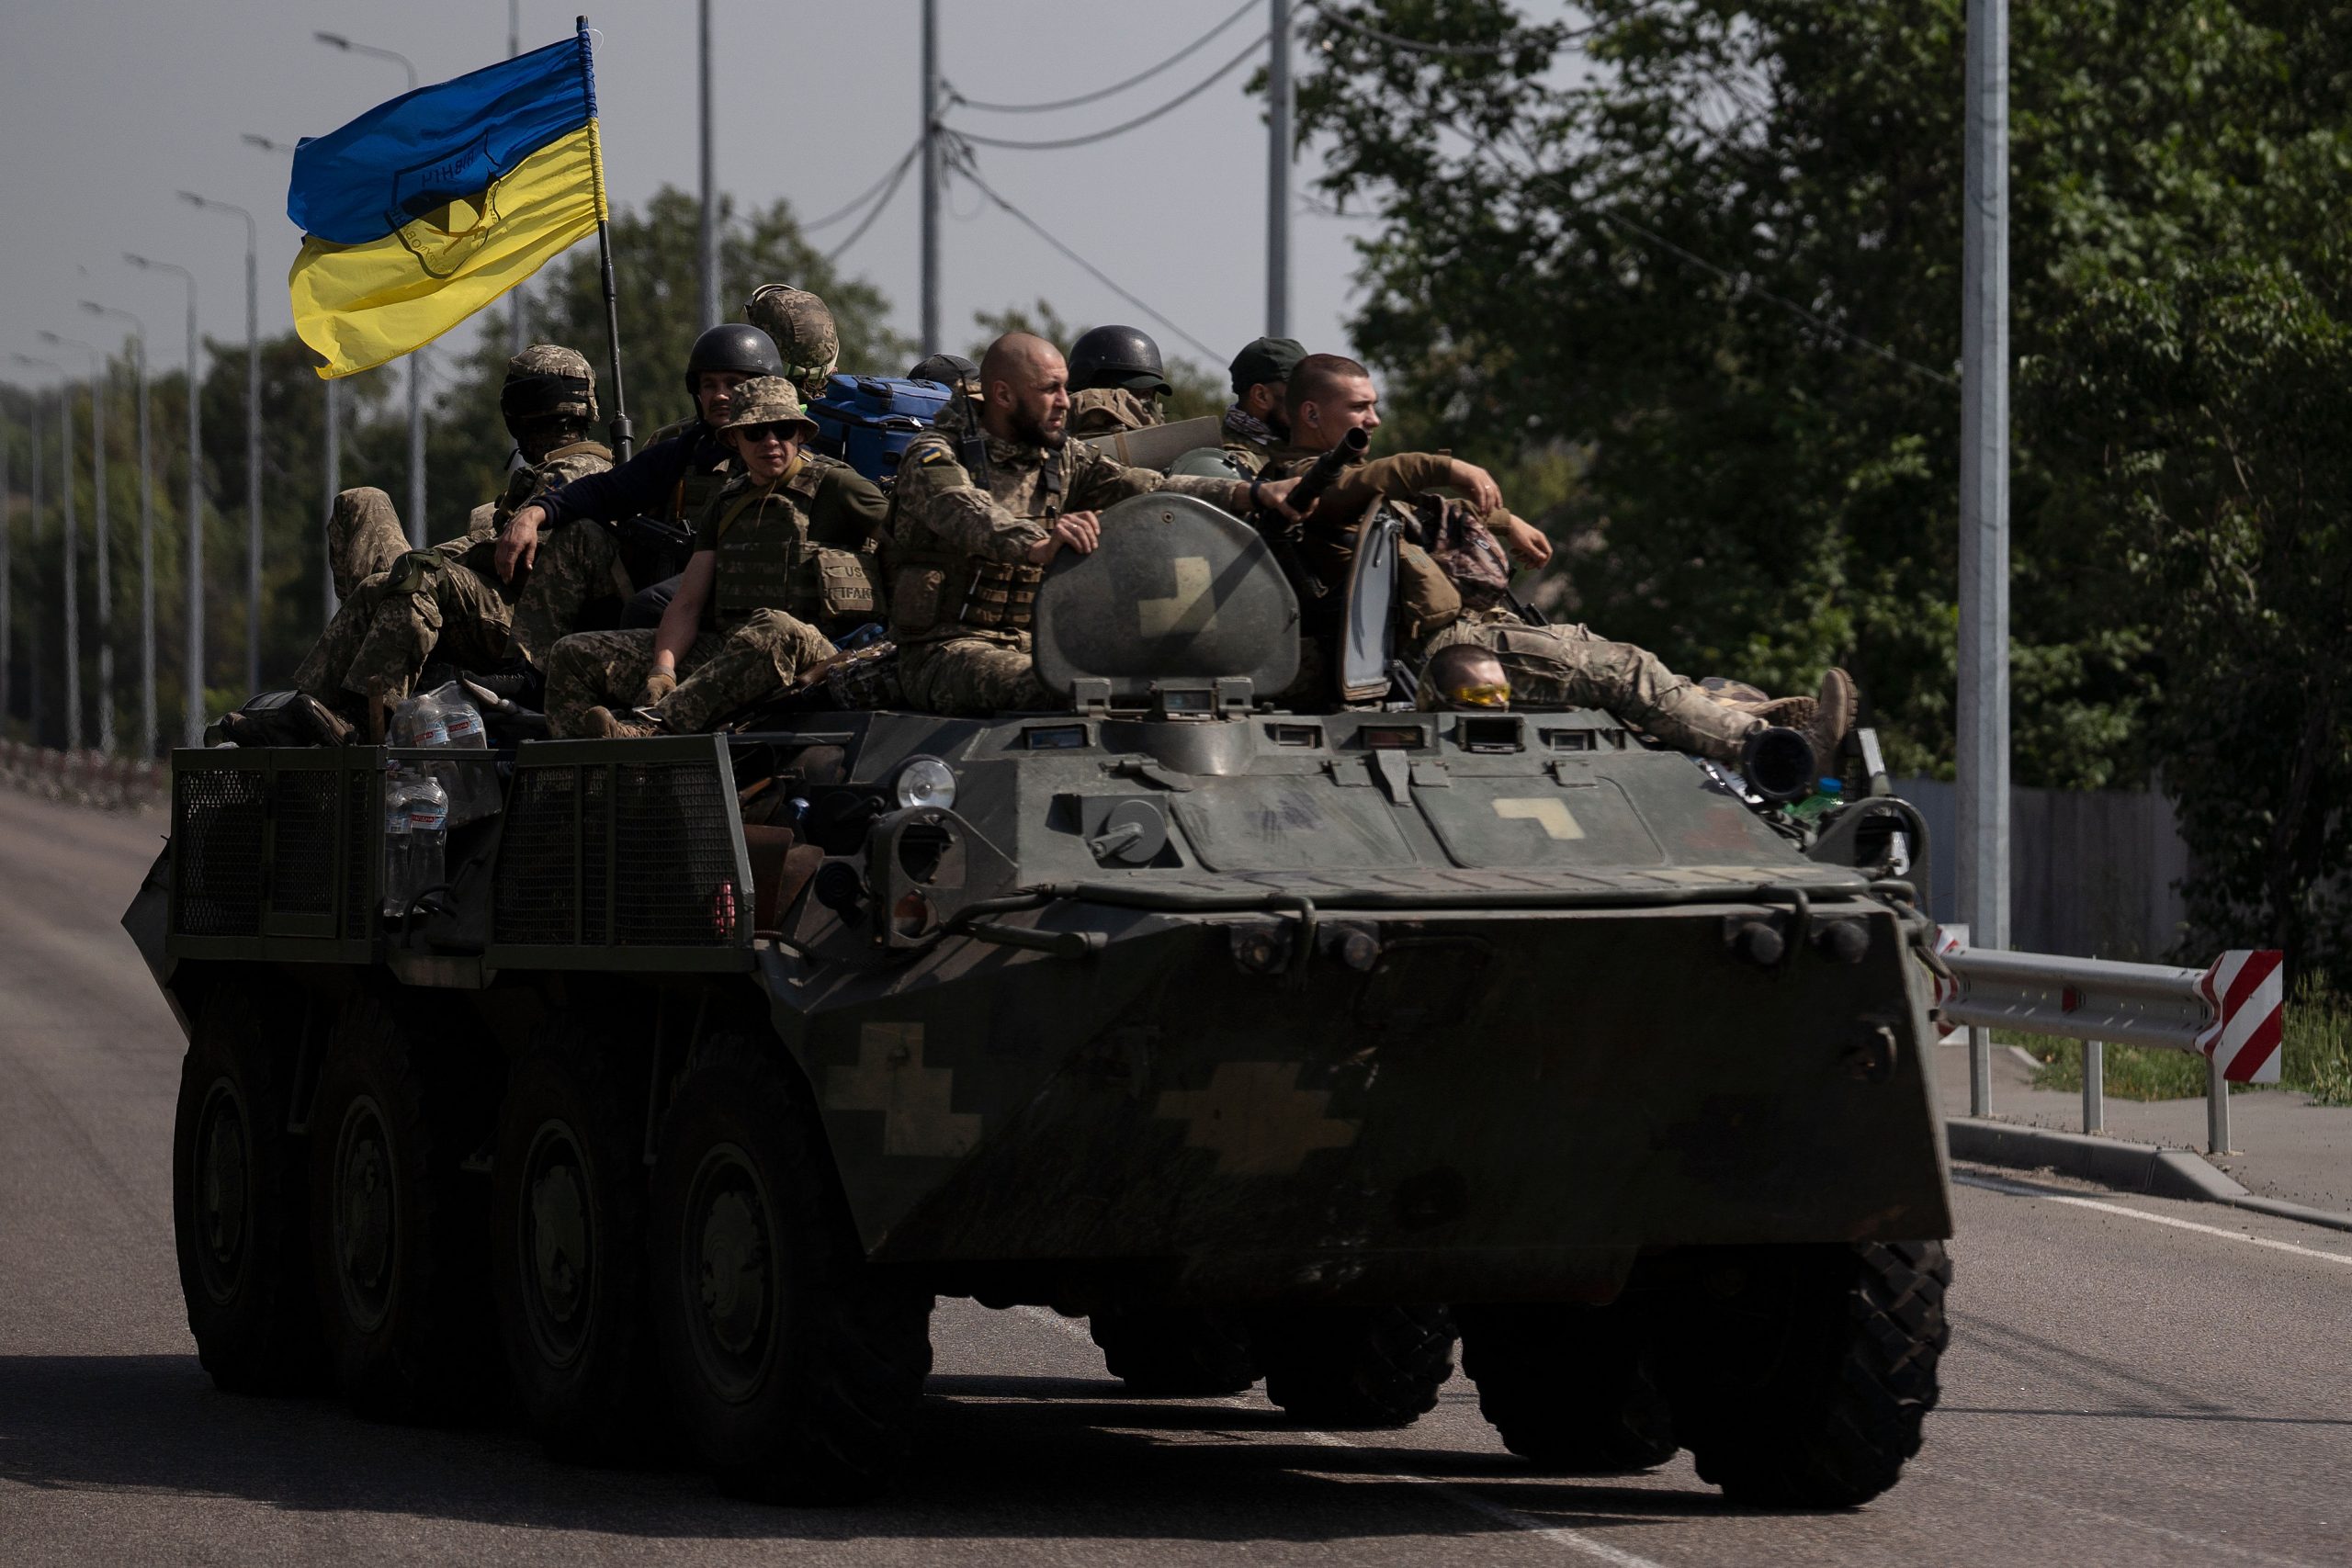 Russians fleeing crucial Luhansk town, says Ukraine as war enters new phase